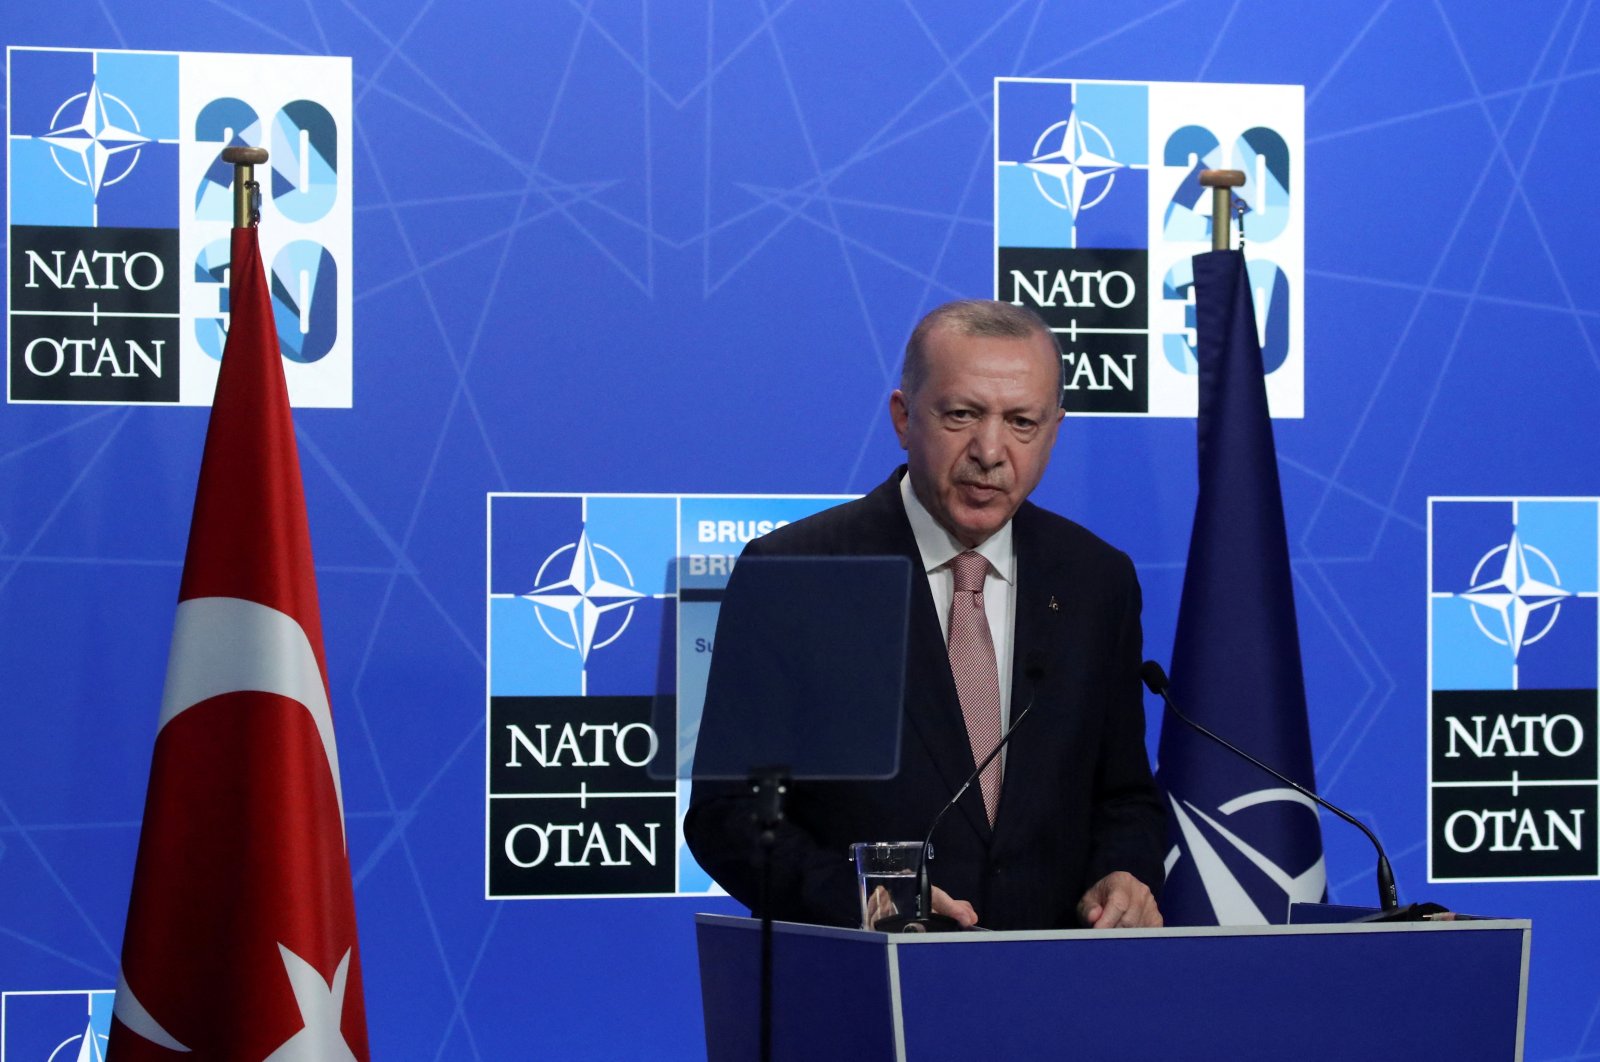 President Recep Tayyip Erdoğan holds a news conference during the NATO summit at the Alliance&#039;s headquarters in Brussels, Belgium, June 14, 2021. (Reuters File Photo)